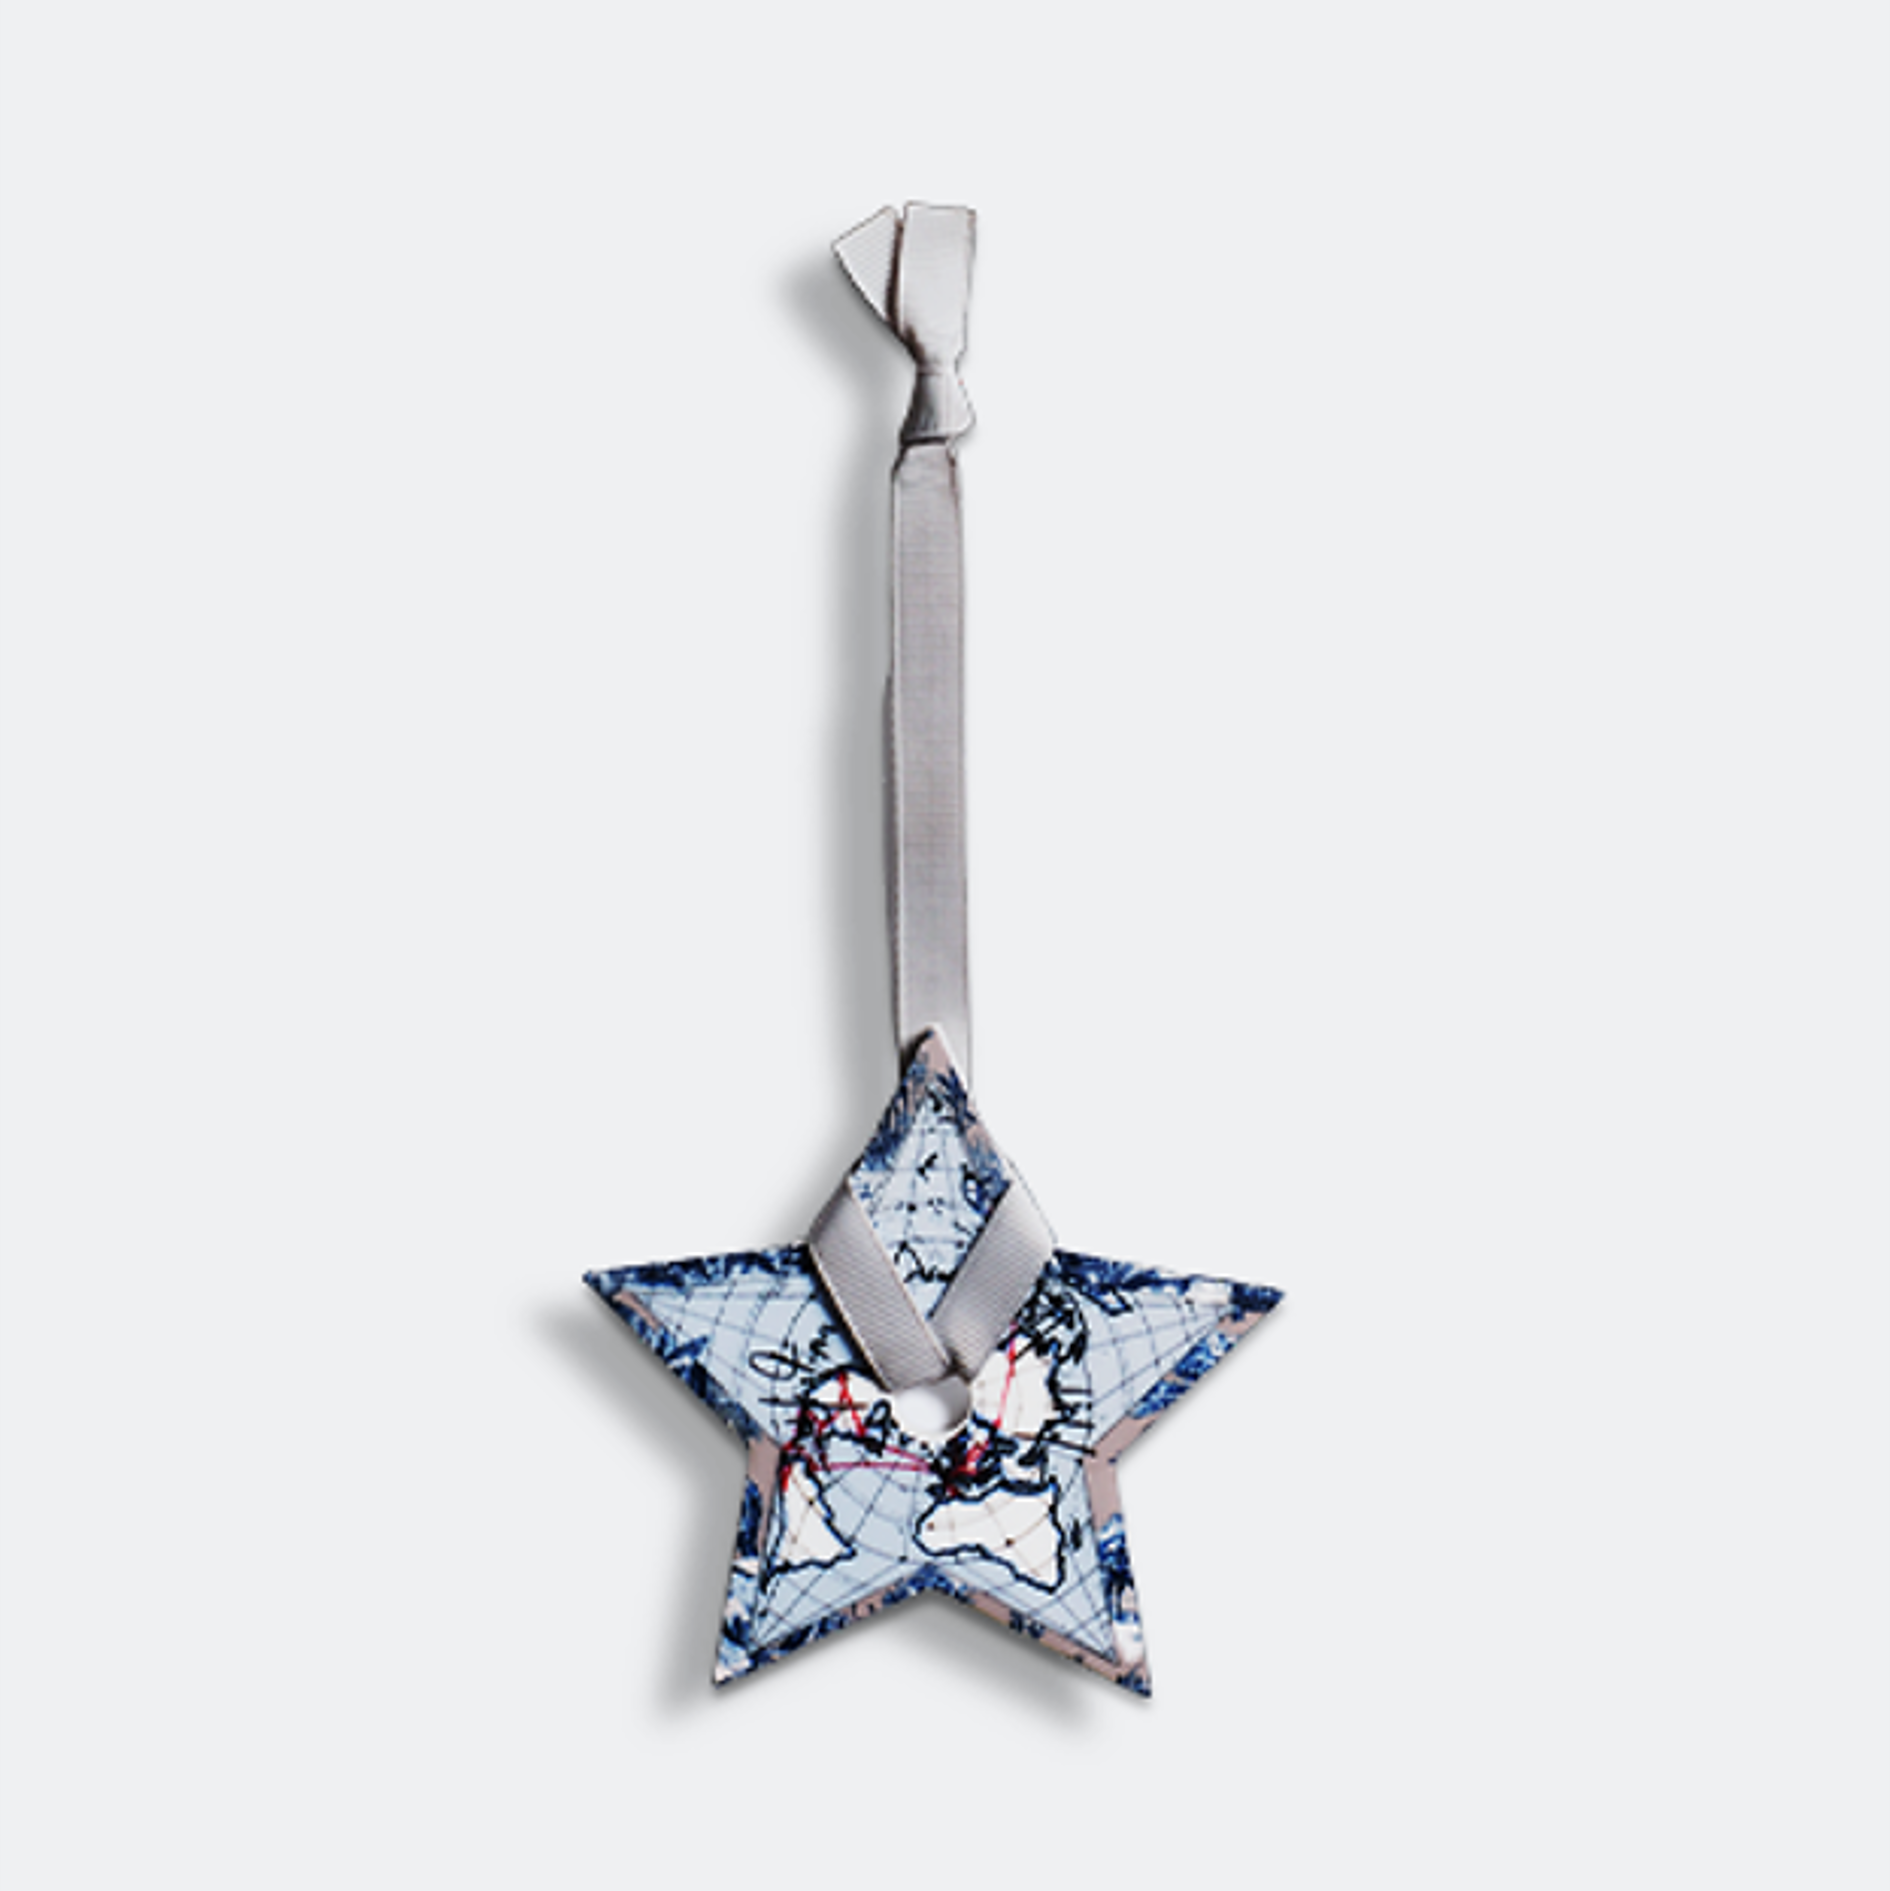 ONLINE MEMBER EXCLUSIVE GWP - PERFUMABLE DIOR STAR CERAMIC CHARM